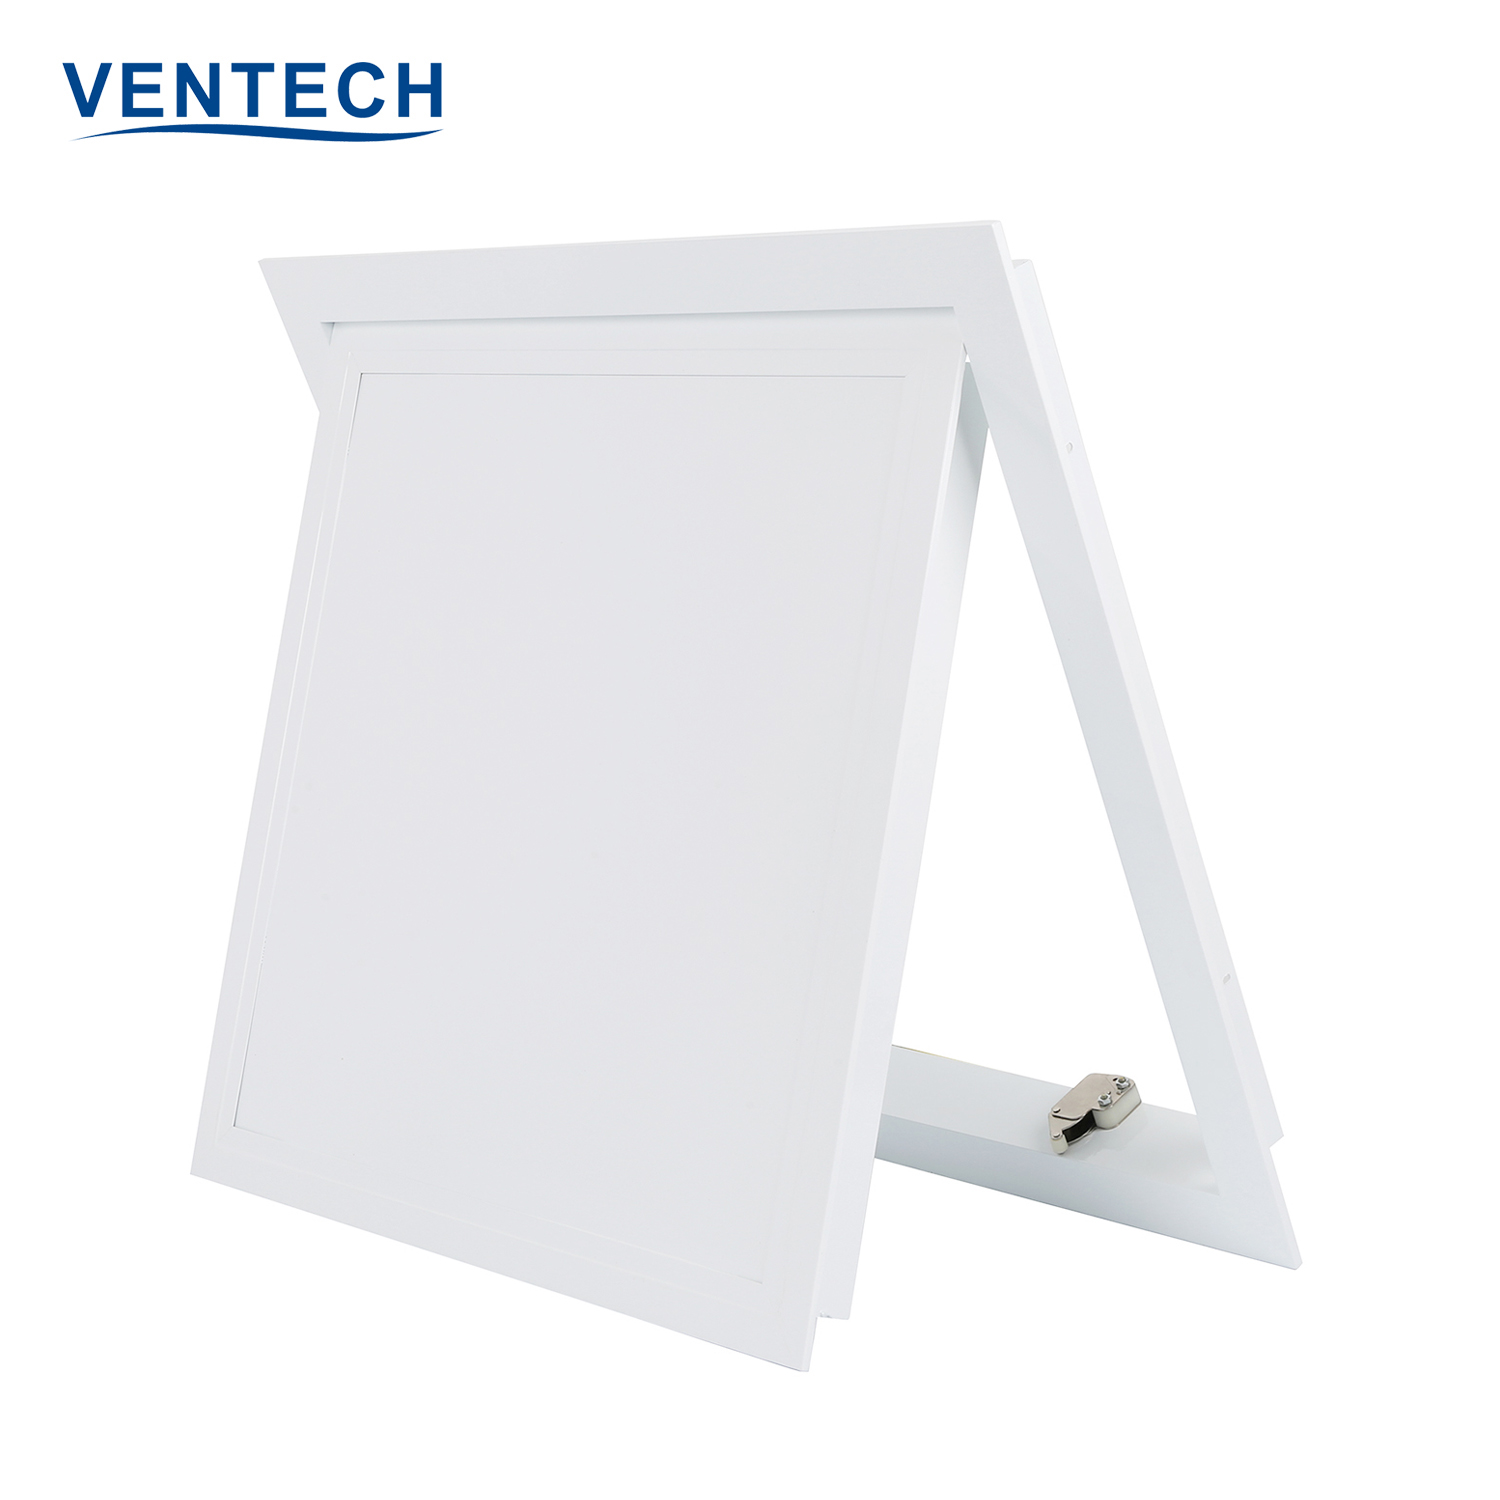 Ventech hvac access panel supply for promotion-2